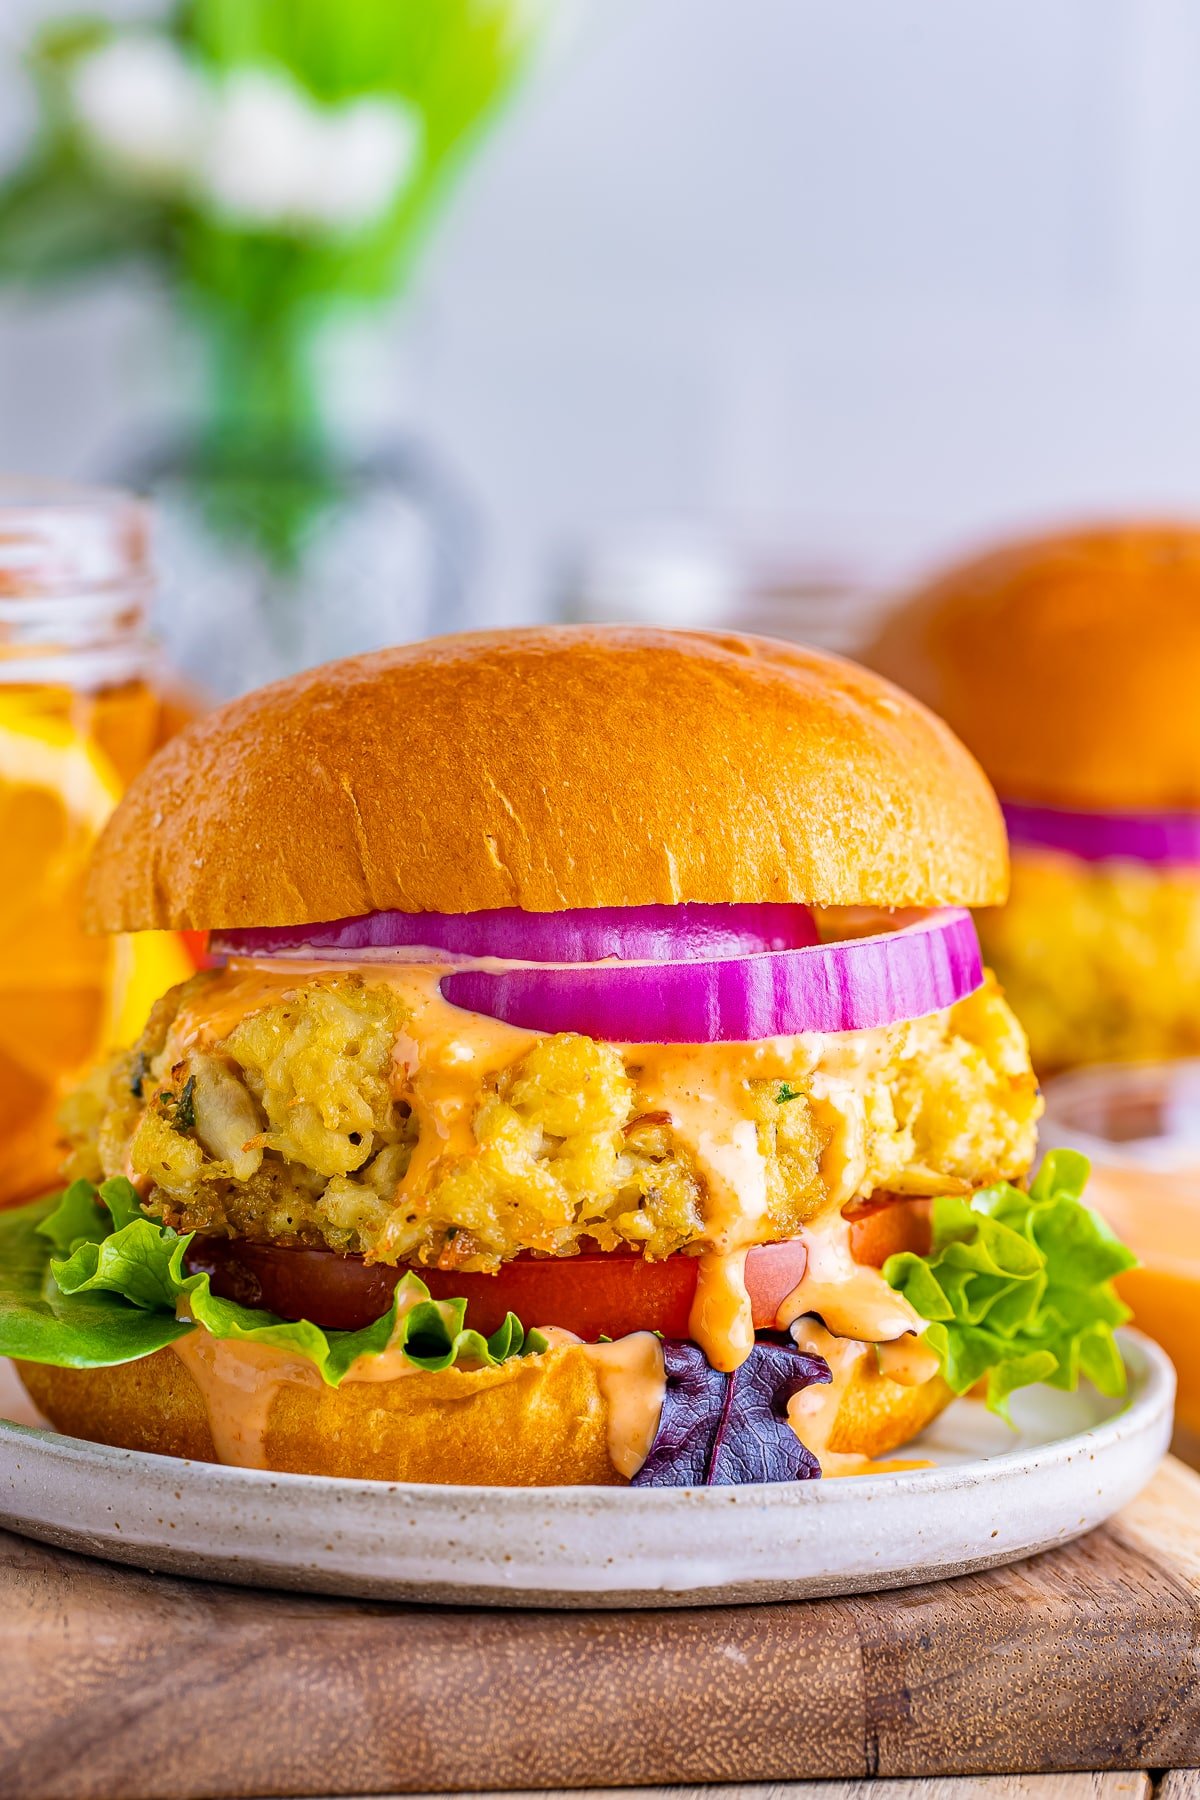 Maryland Crab Cakes Sandwich (with Old Bay)